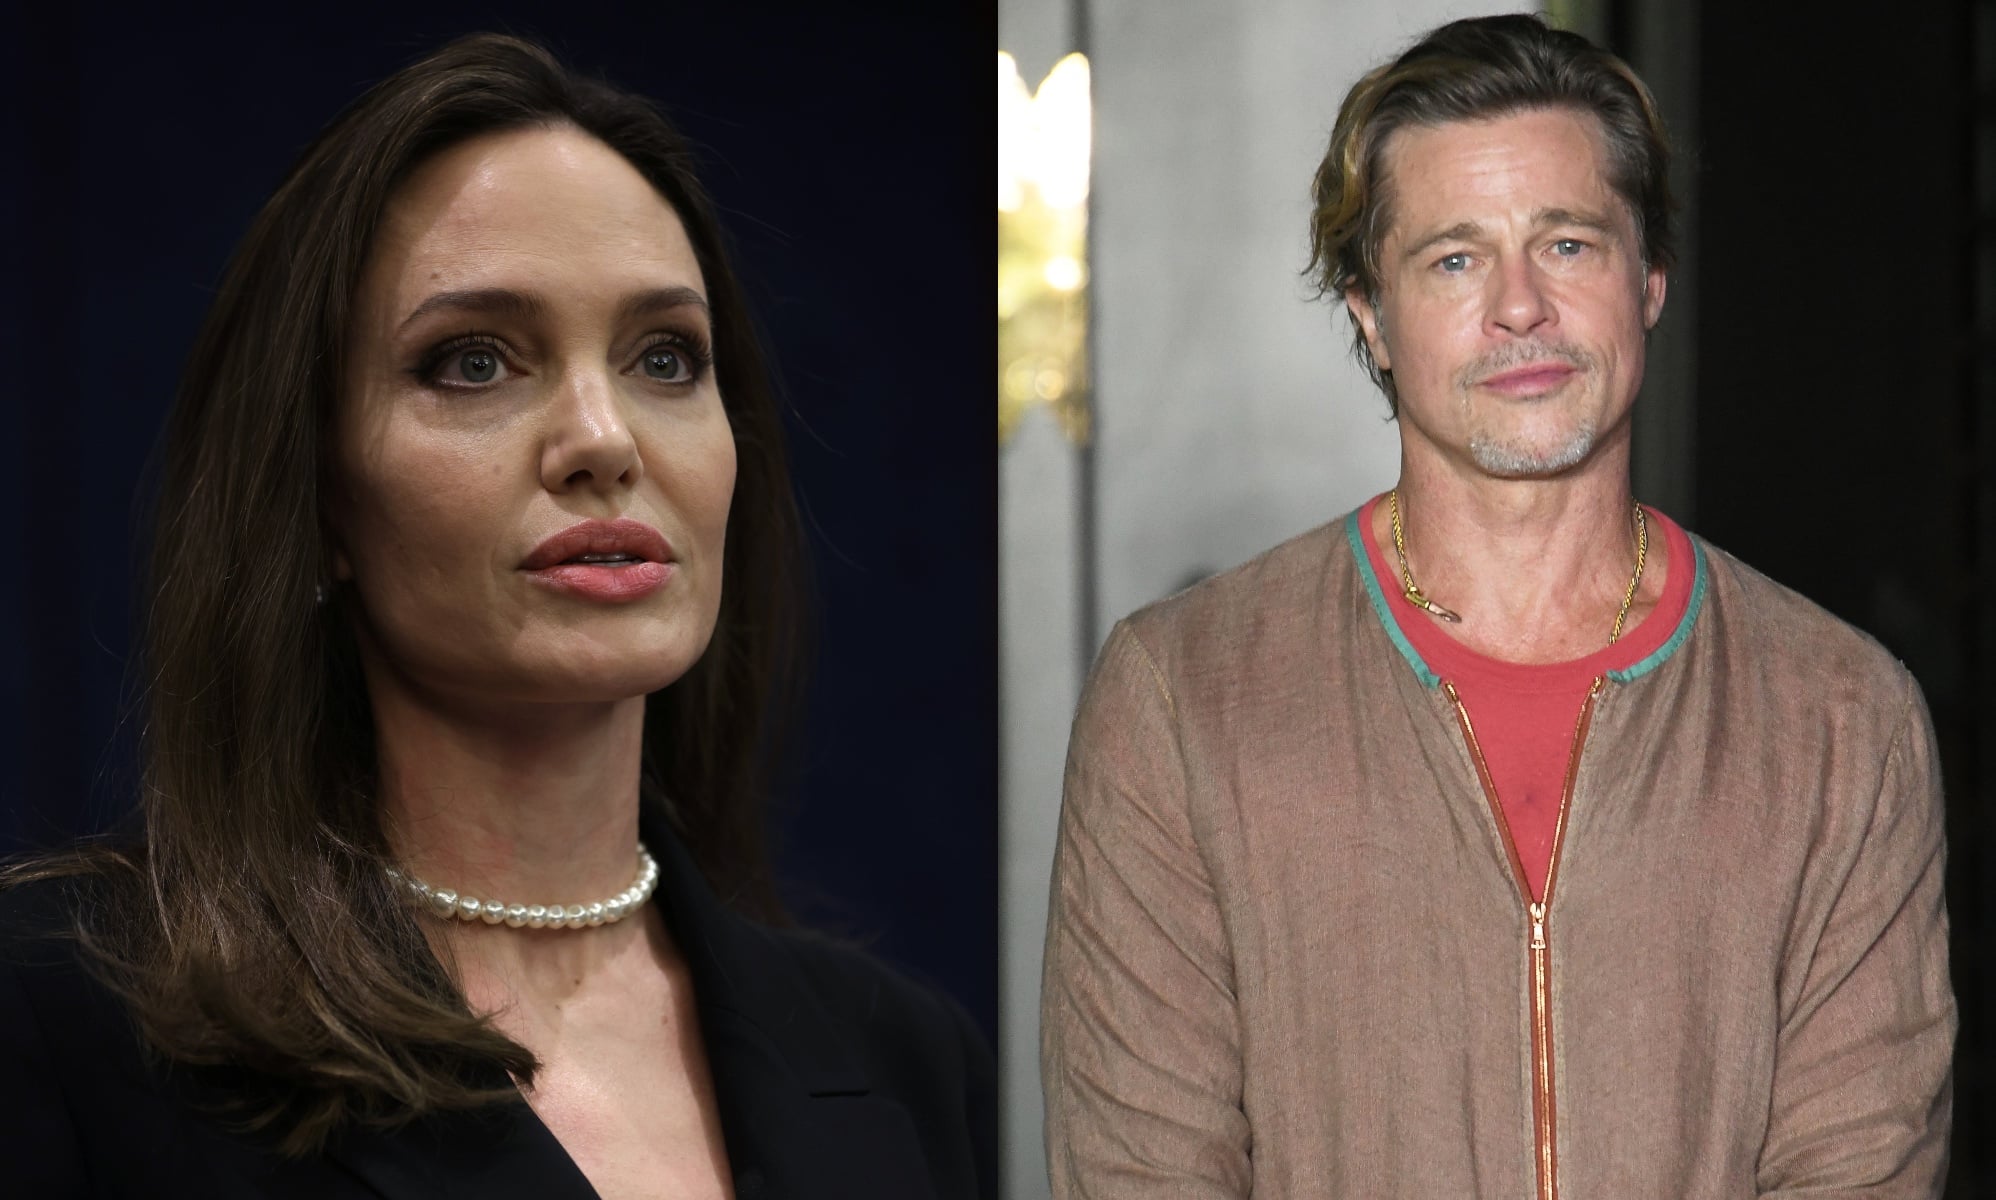 Angelina Jolie accuses Brad Pitt of ‘physical and emotional abuse’ in bitter legal battle